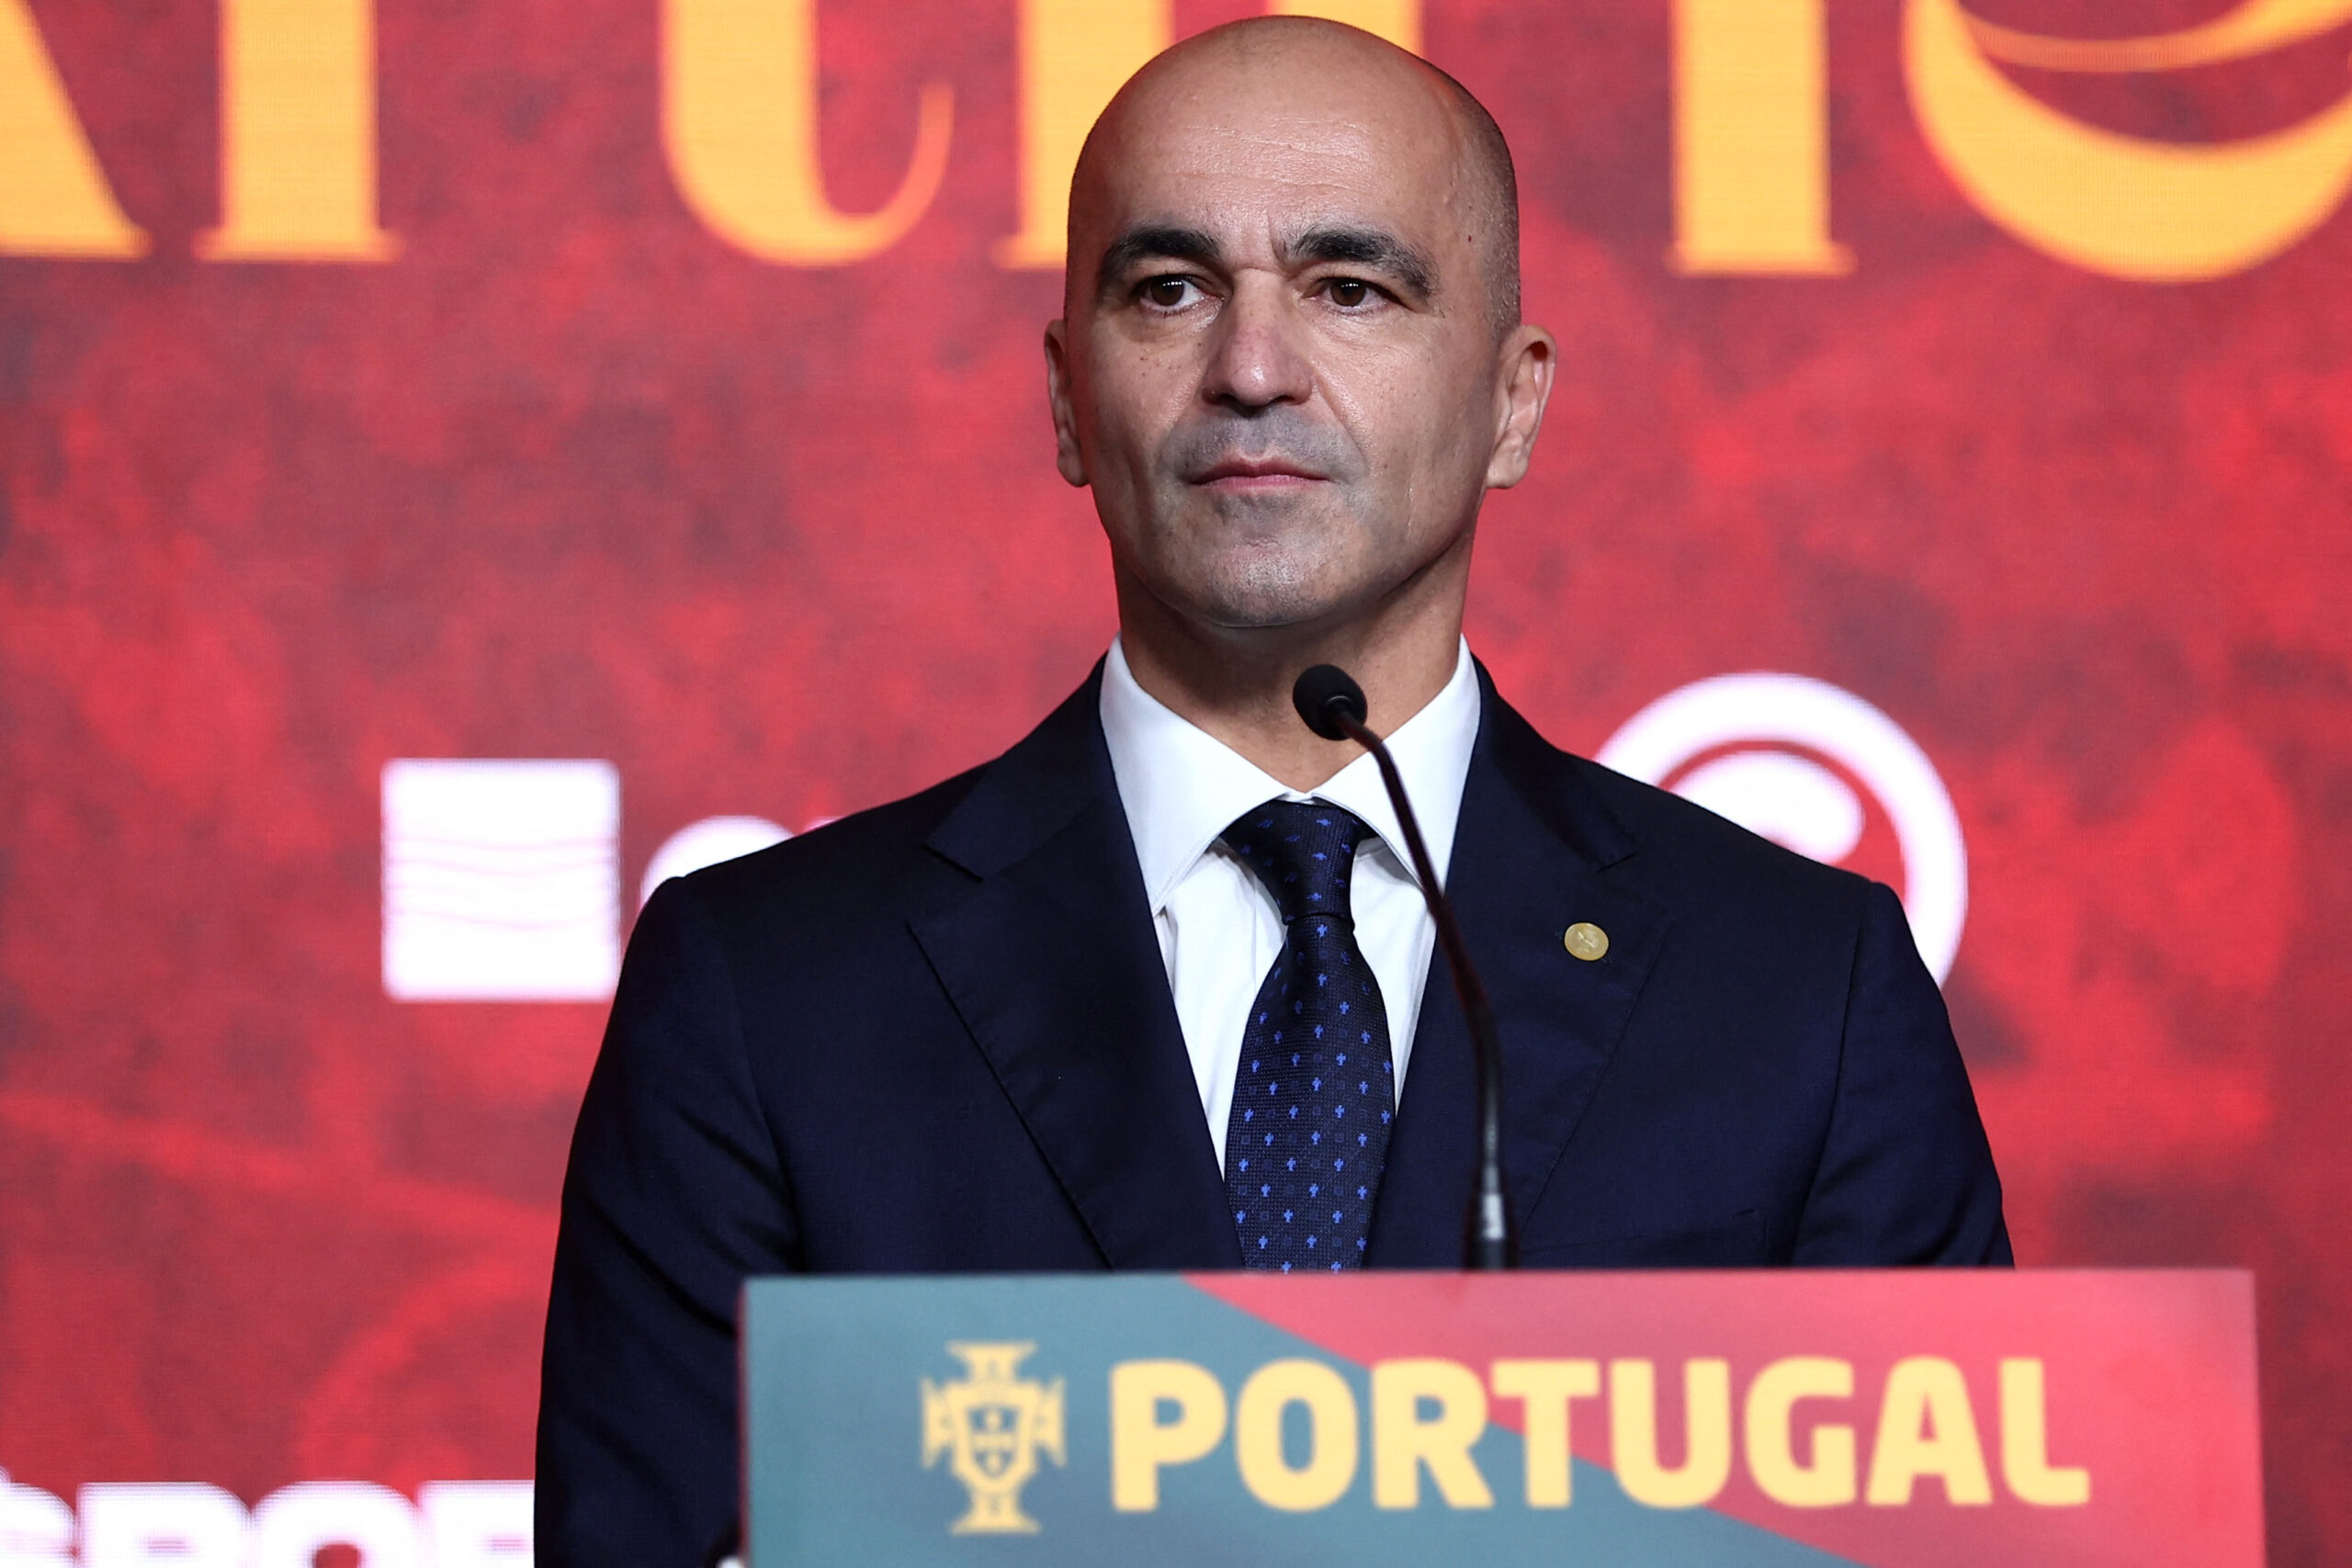 Roberto Martinez is the new Portugal Manager